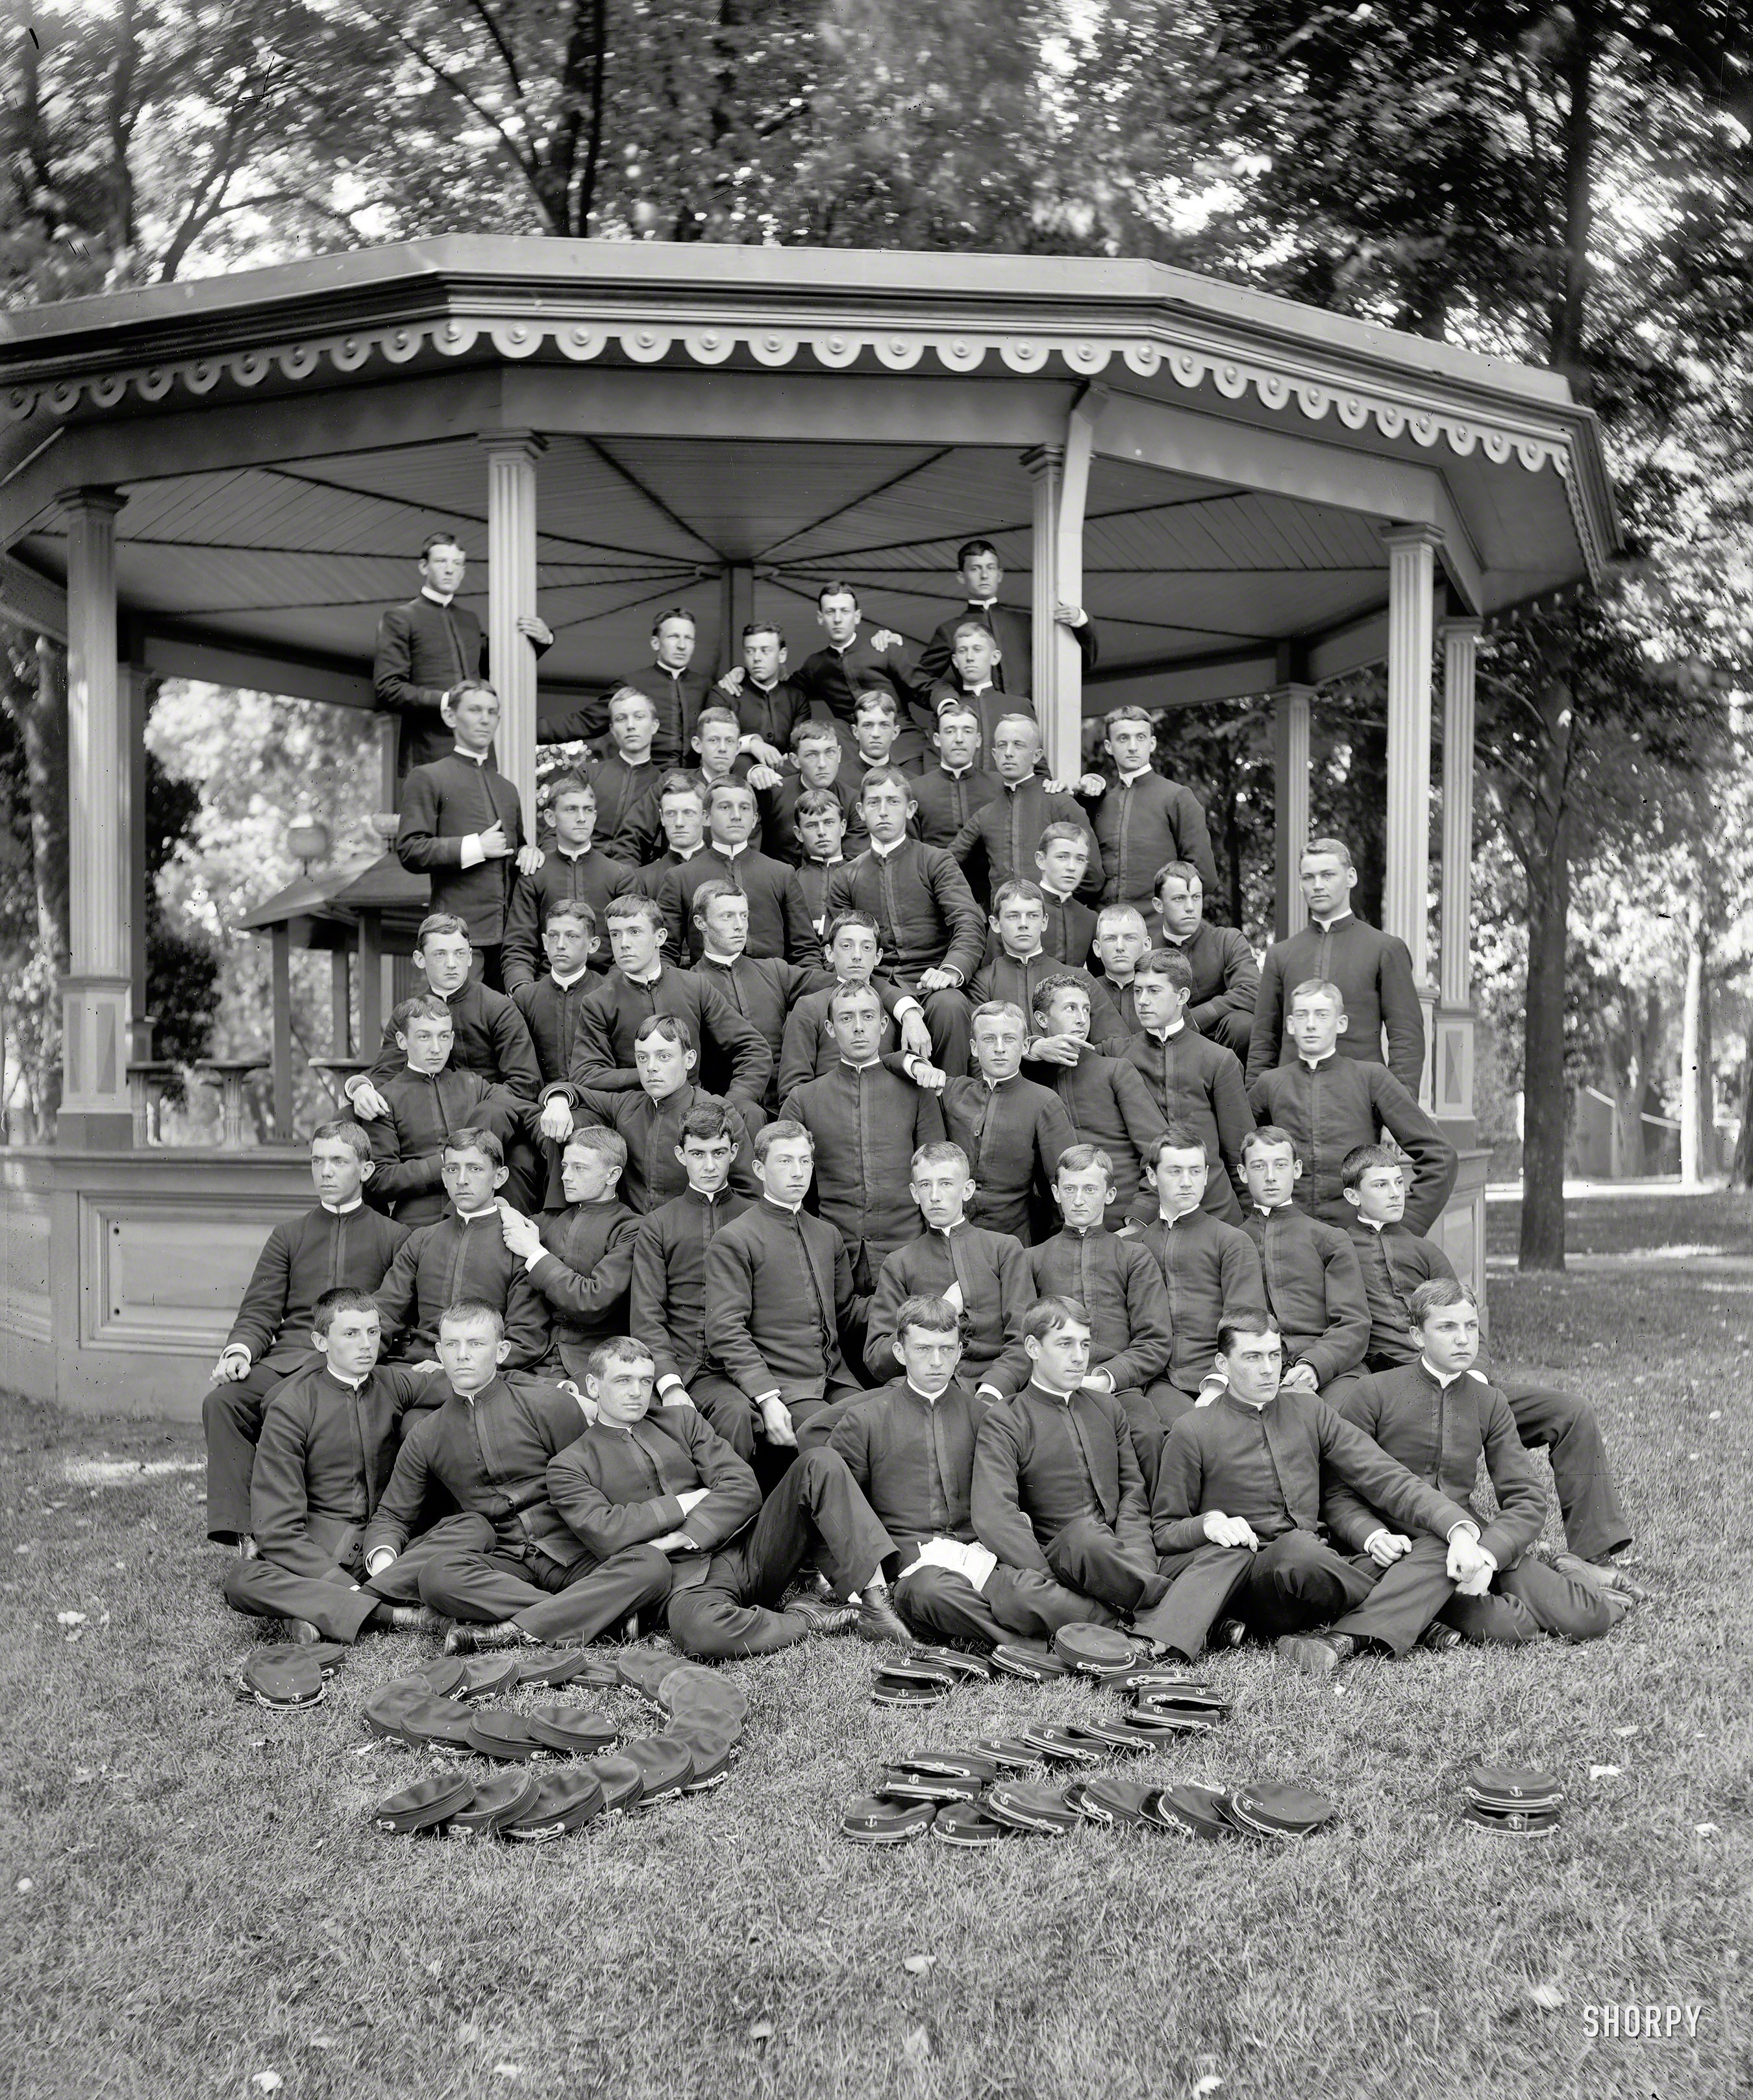 Annapolis, Maryland, circa 1892. "Class of '92, U.S. Naval Academy." Gilbert & Sullivan meet Lord of the Flies. Photo by Edward Hart. View full size.